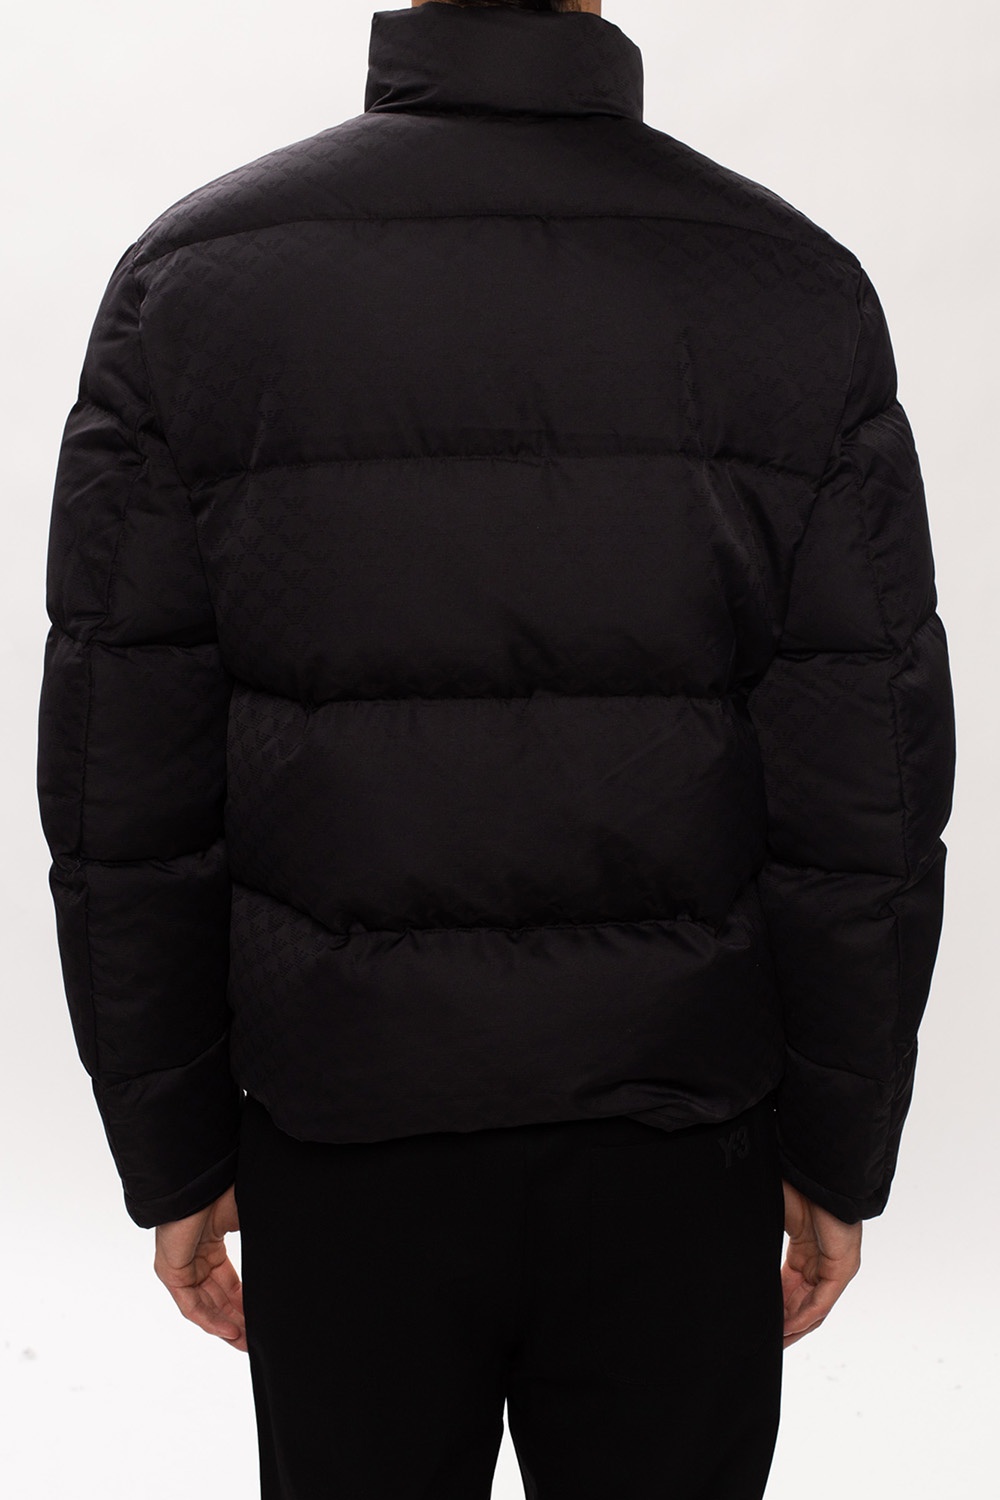 Emporio Armani Quilted down jacket | Men's Clothing | Vitkac